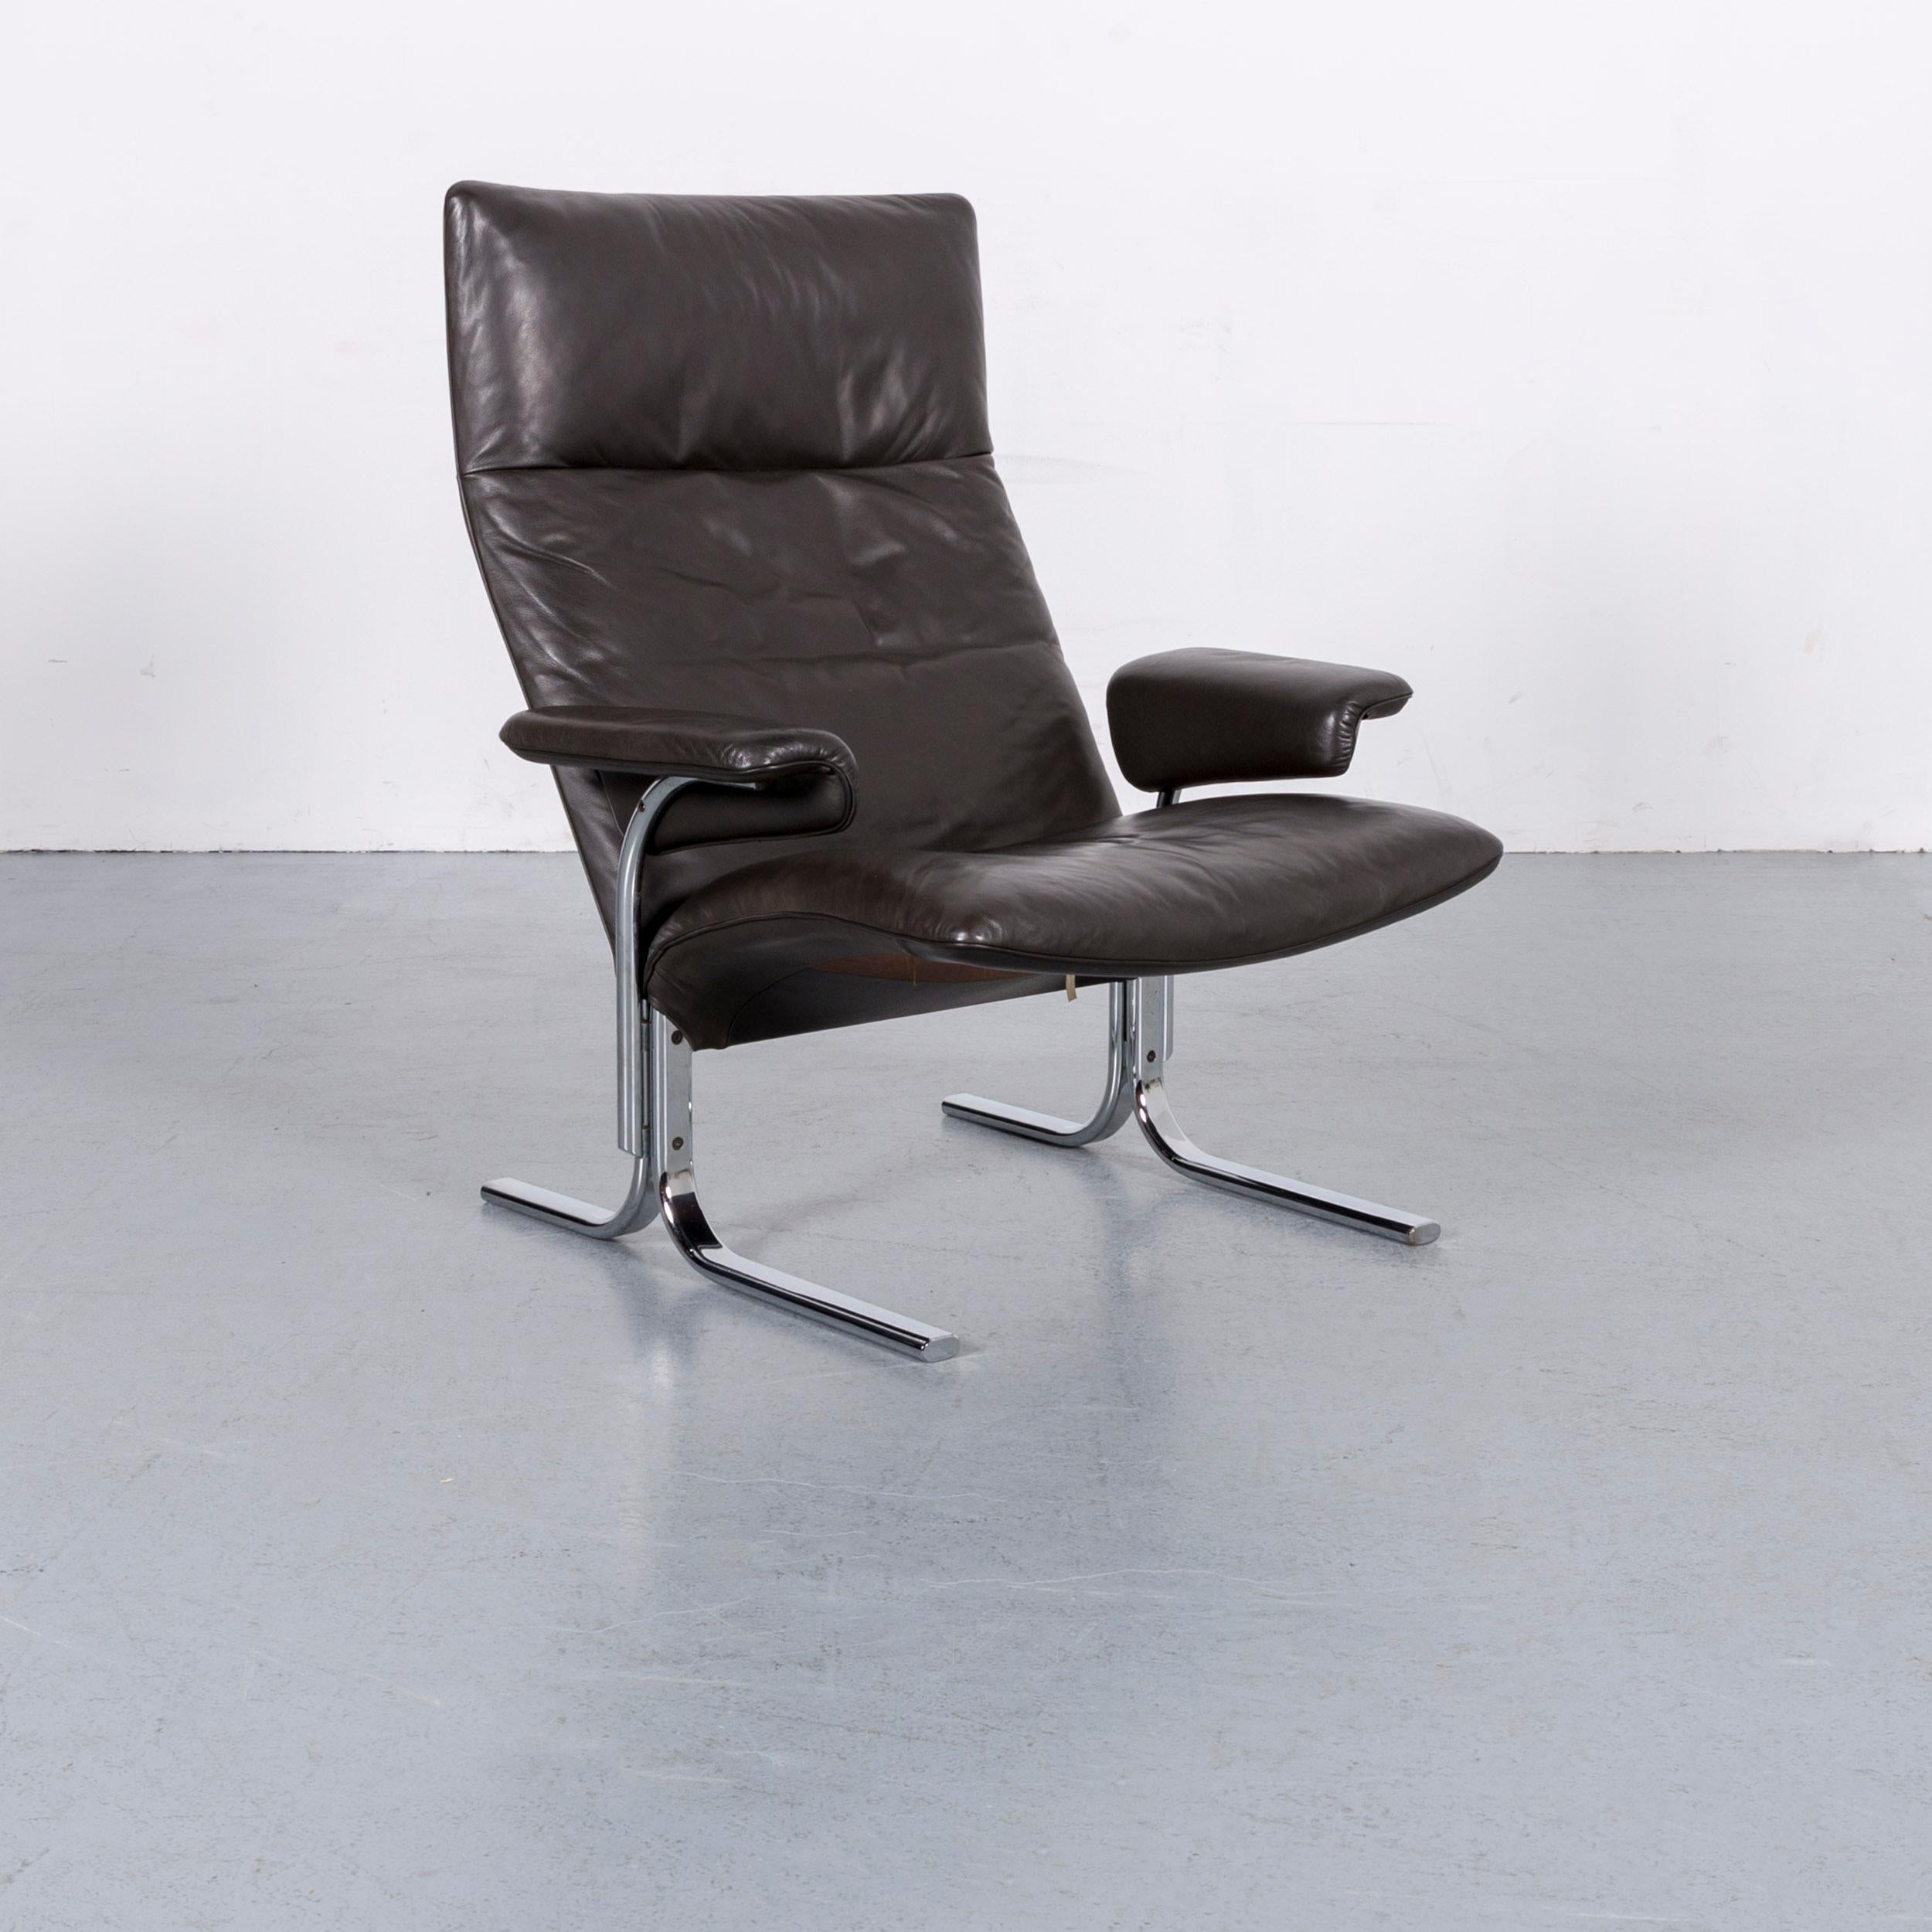 We bring to you an De Sede DS 2030 leather armchair brown one-seat.















